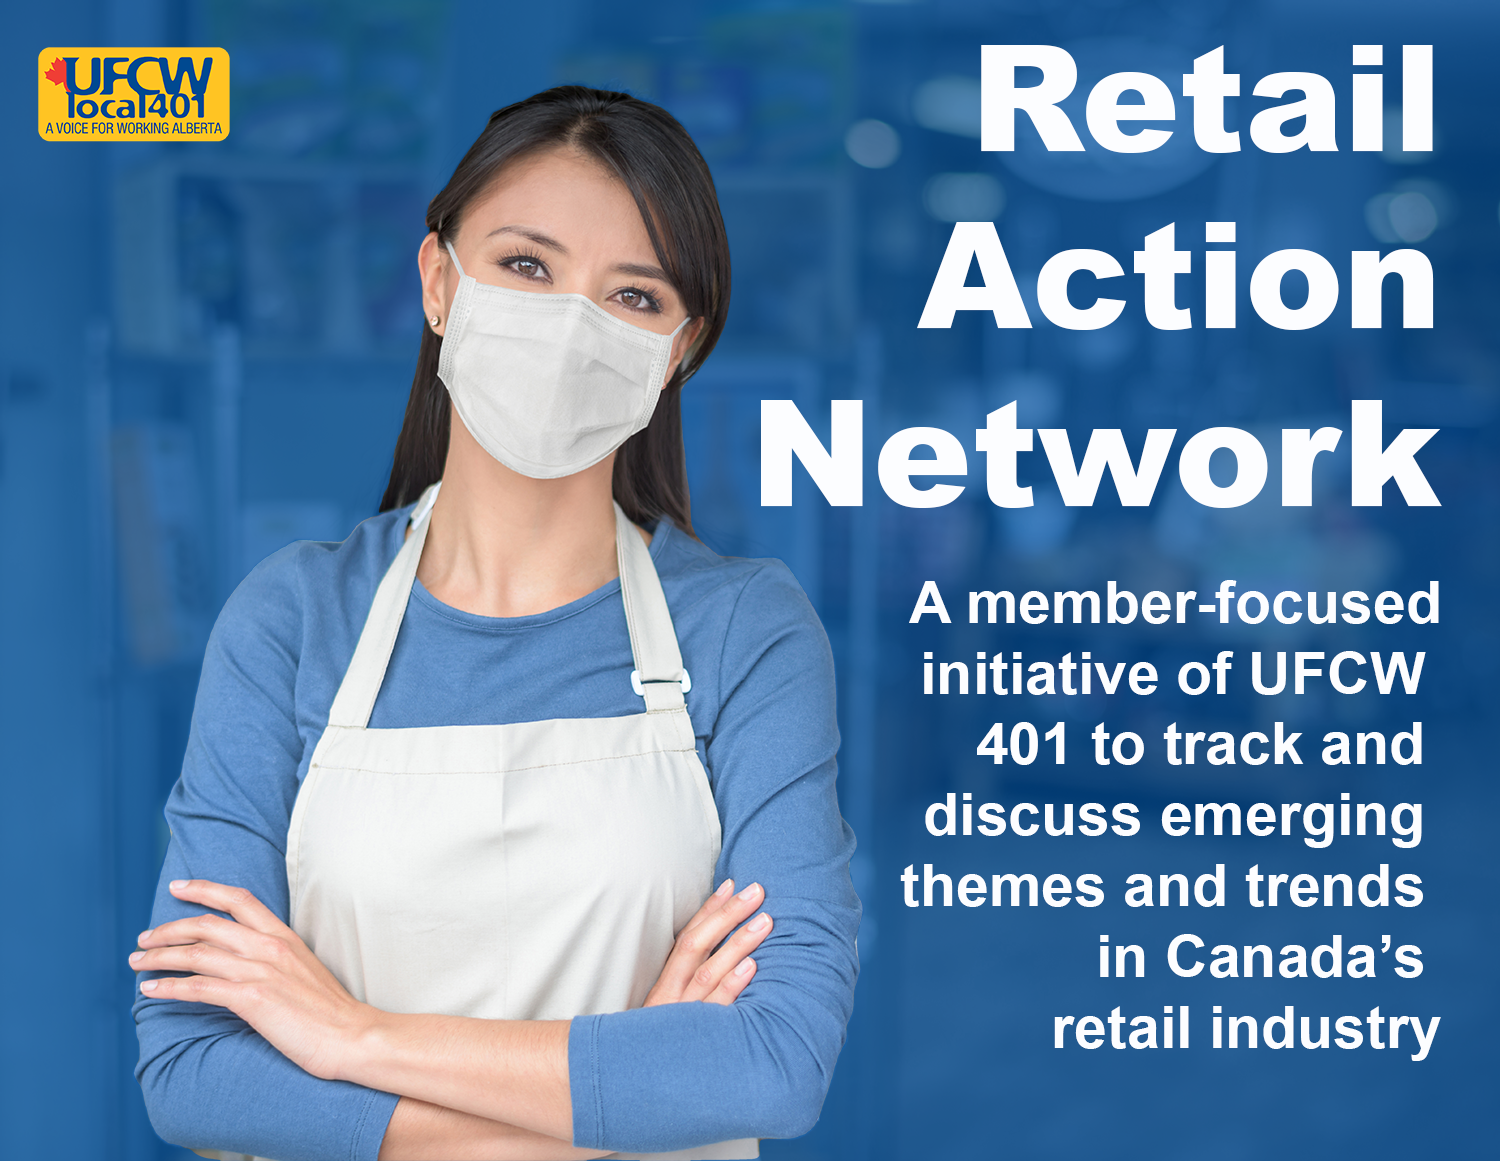 Retail Action Network